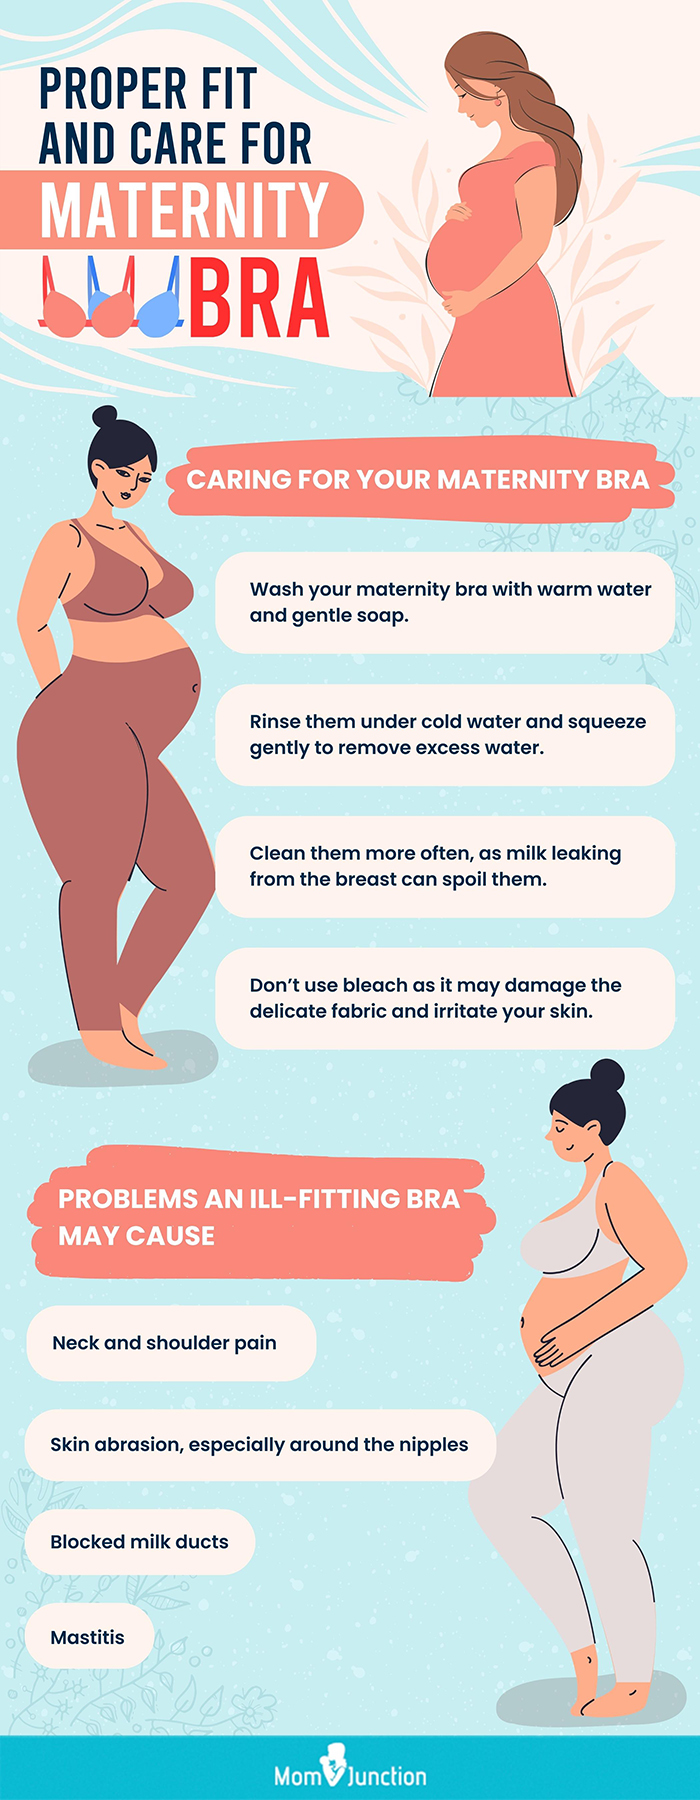 How to Choose the Right Bra During Pregnancy